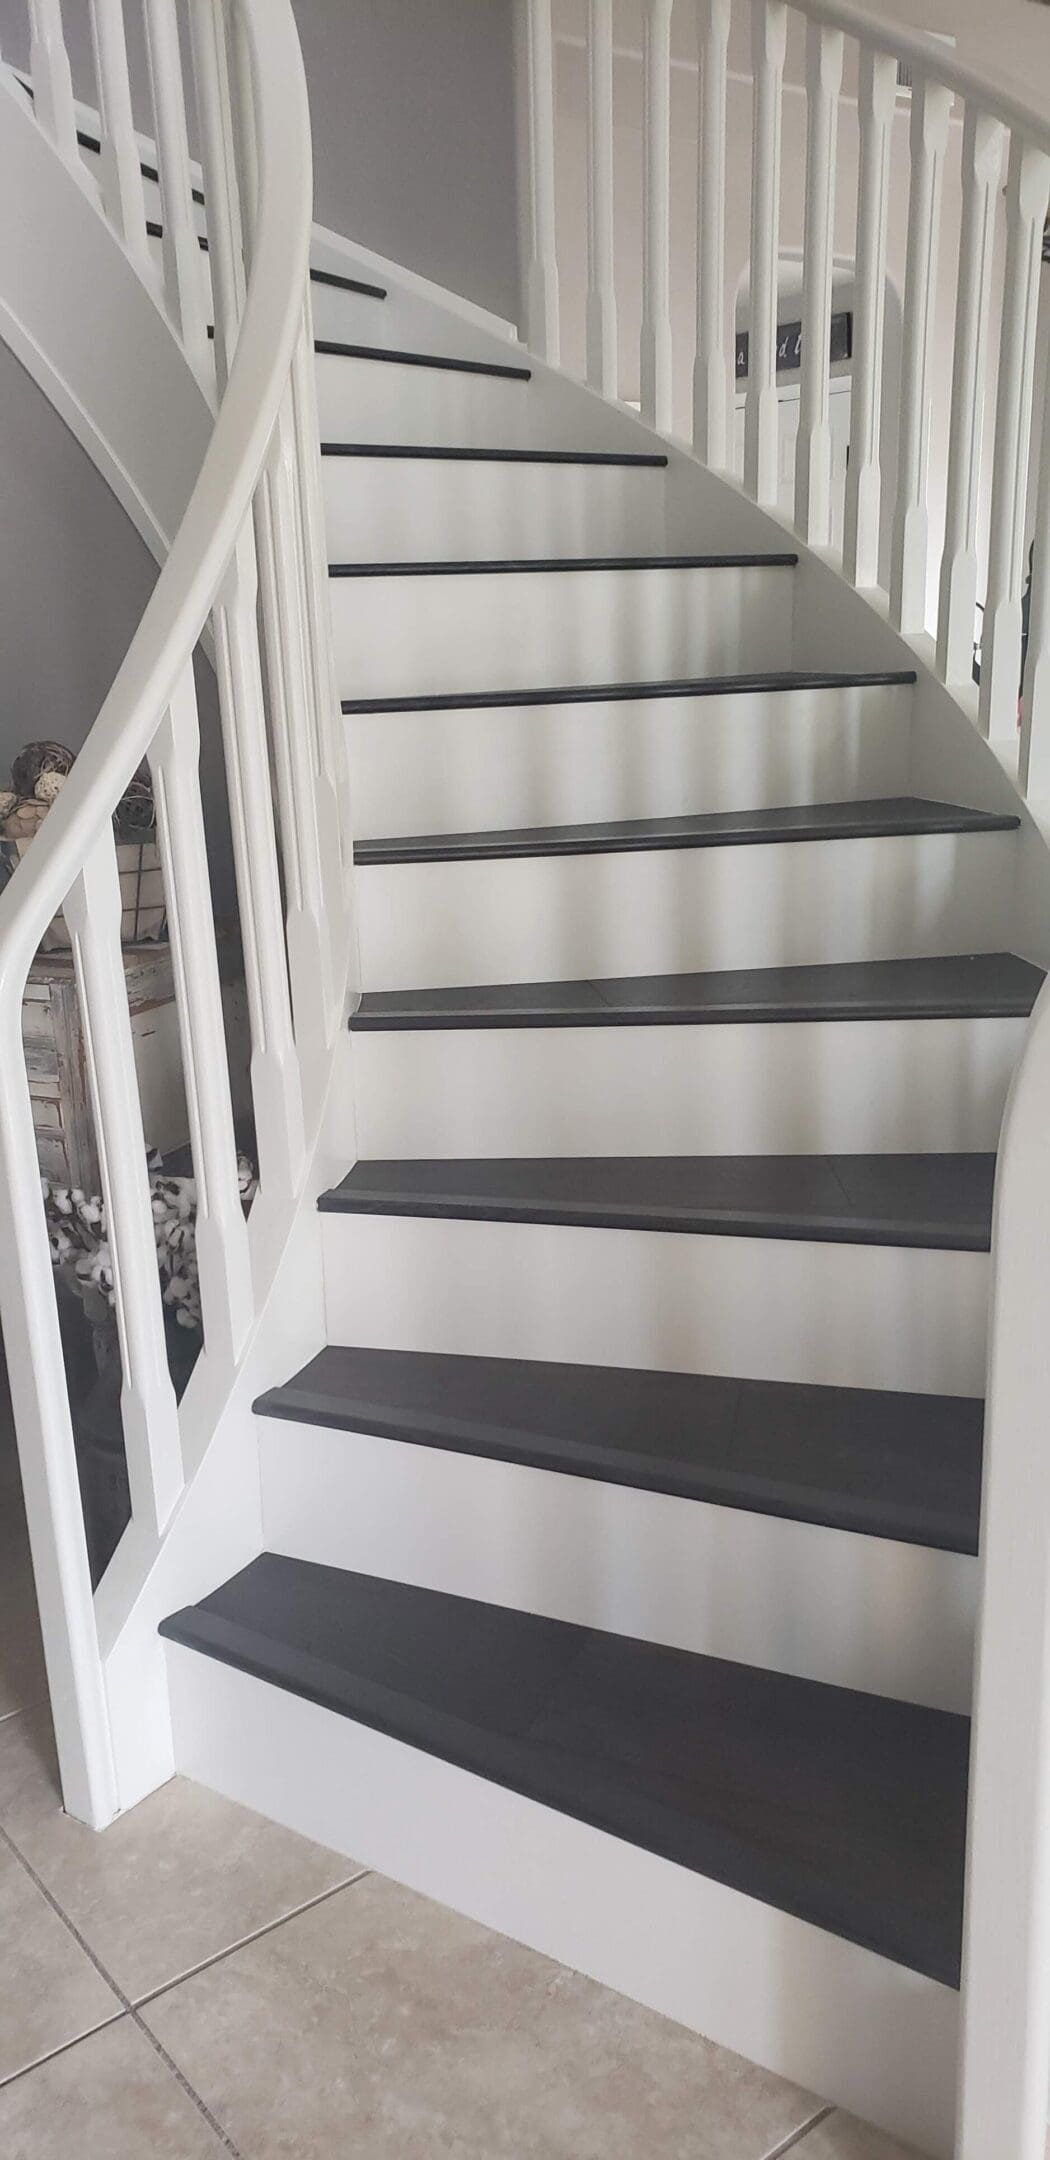 A staircase with white and grey steps painted in the same color.